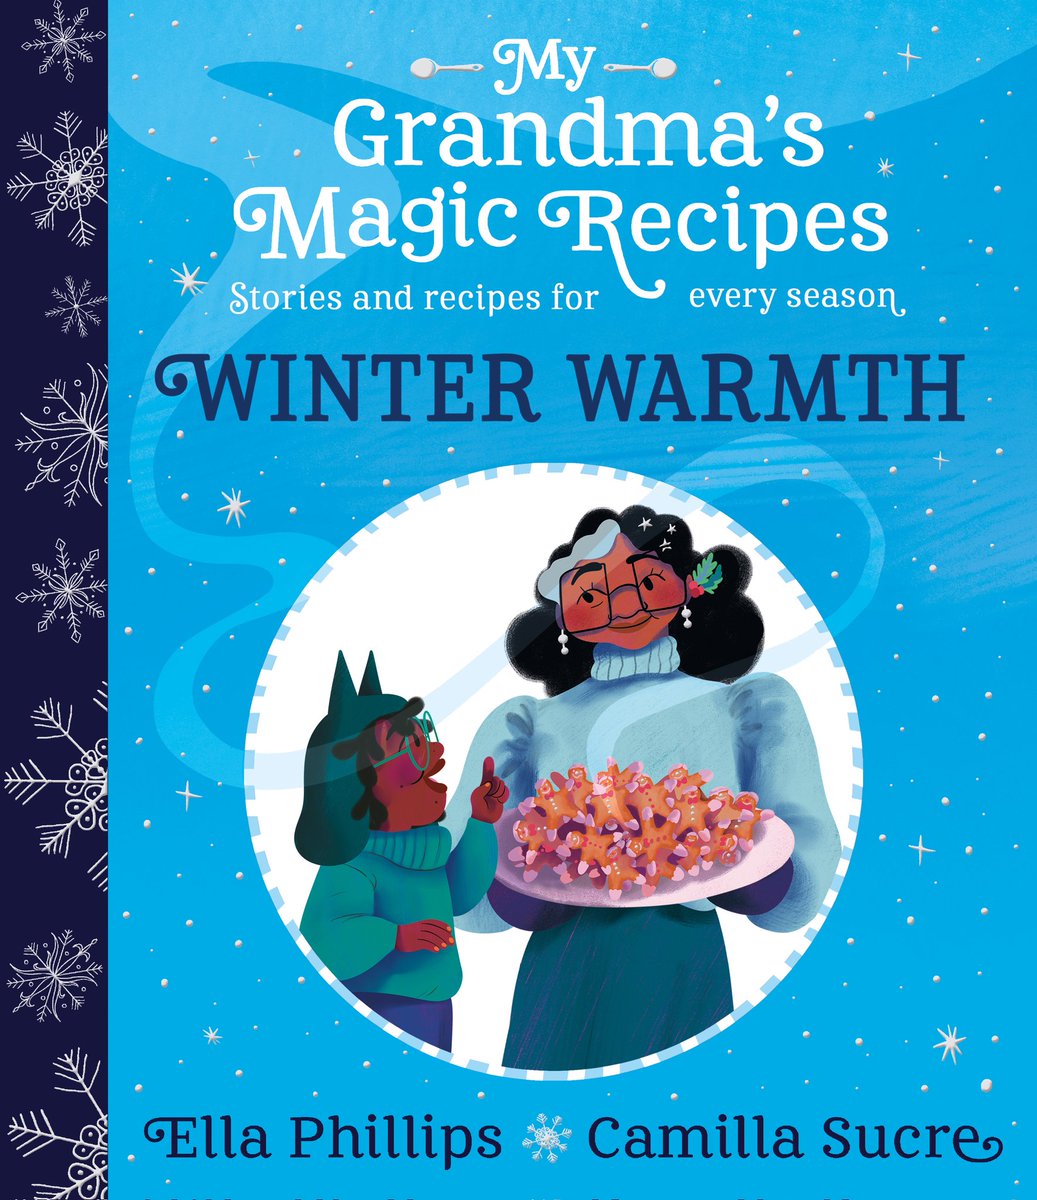 I am very excited to be able to reveal the delicious front cover of my new children's story book illustrated by the magnificent @succreart To be published September 2023 by the amazing team @simonkids_UK #GrandmasMagicRecipes: #WinterWarmth